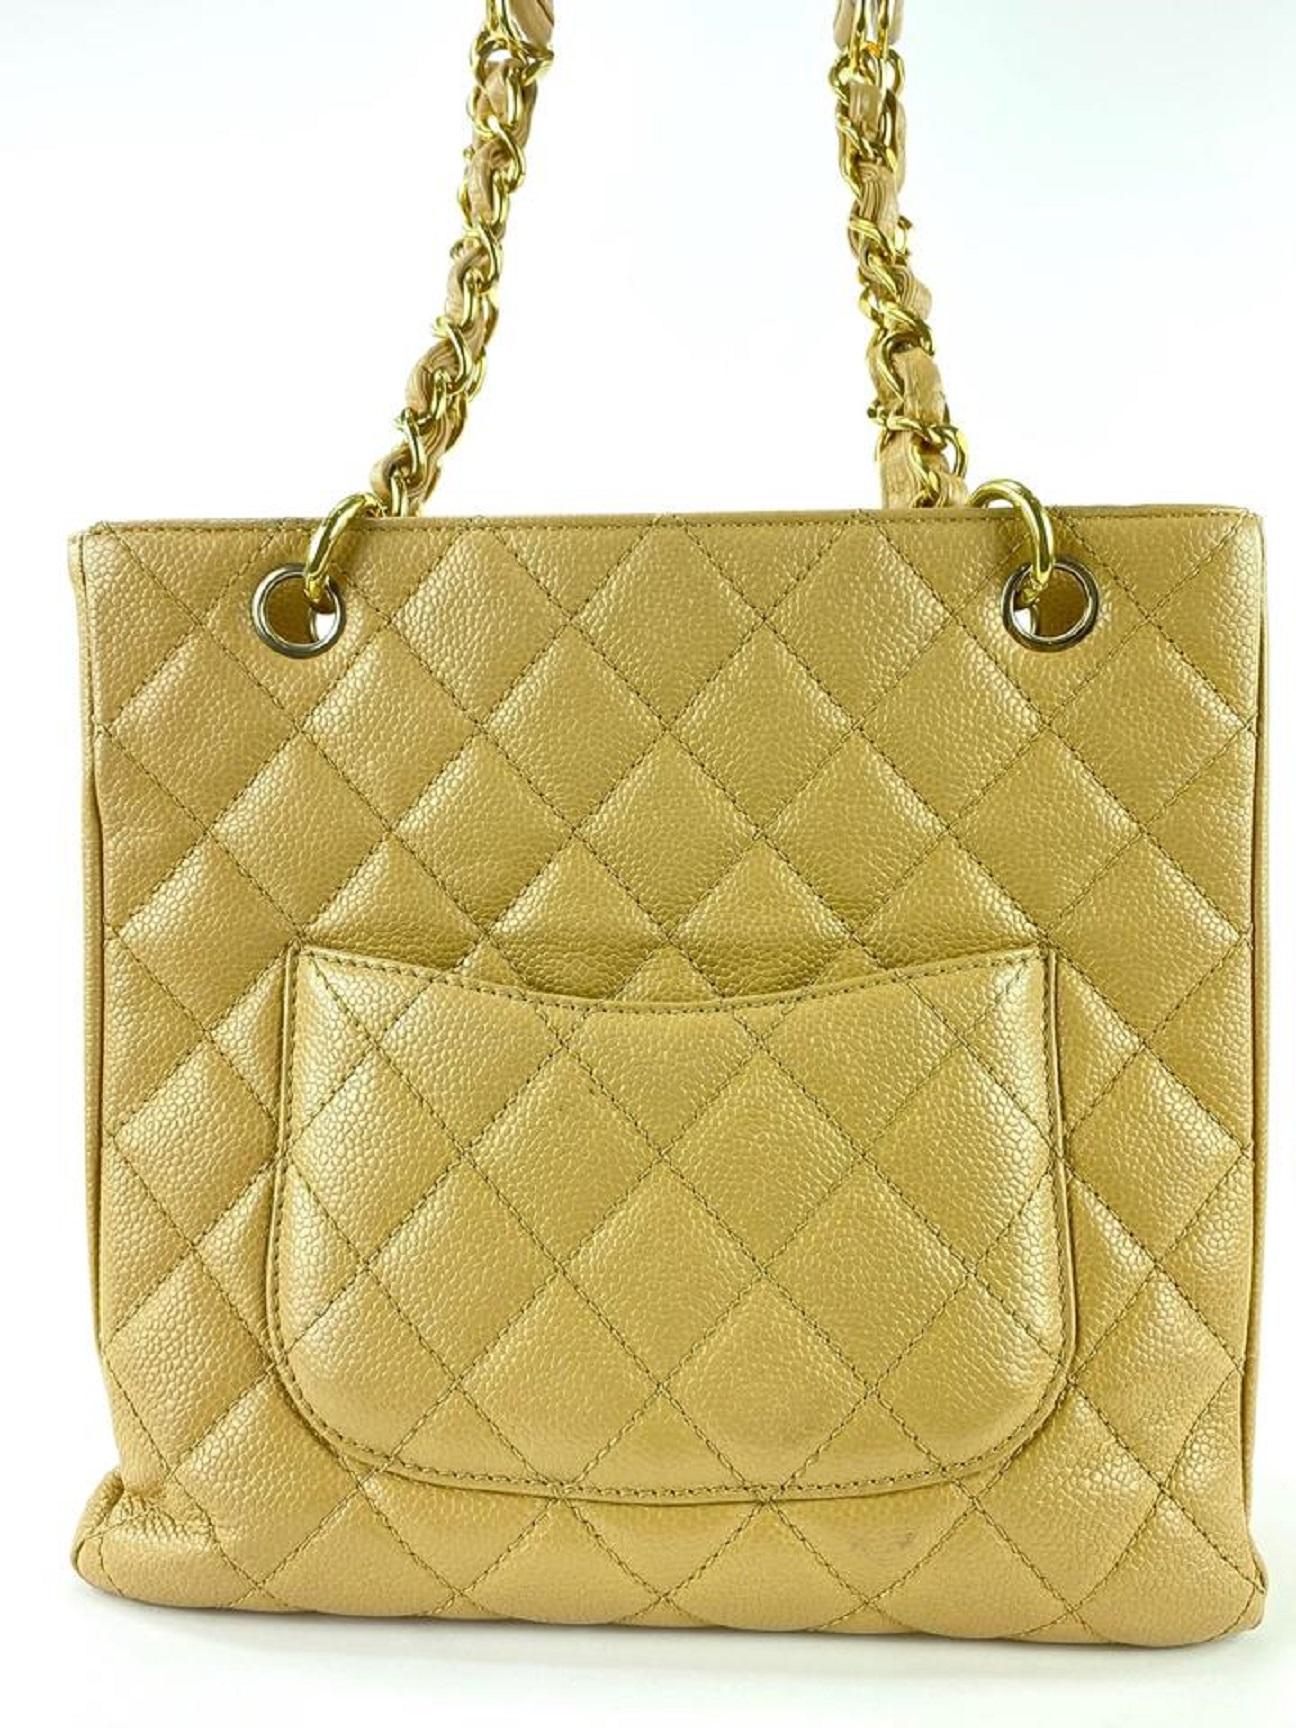 Women's Chanel Dark Beige Quilted Caviar Leather PST Petite Shopping Tote Gold 1120c3